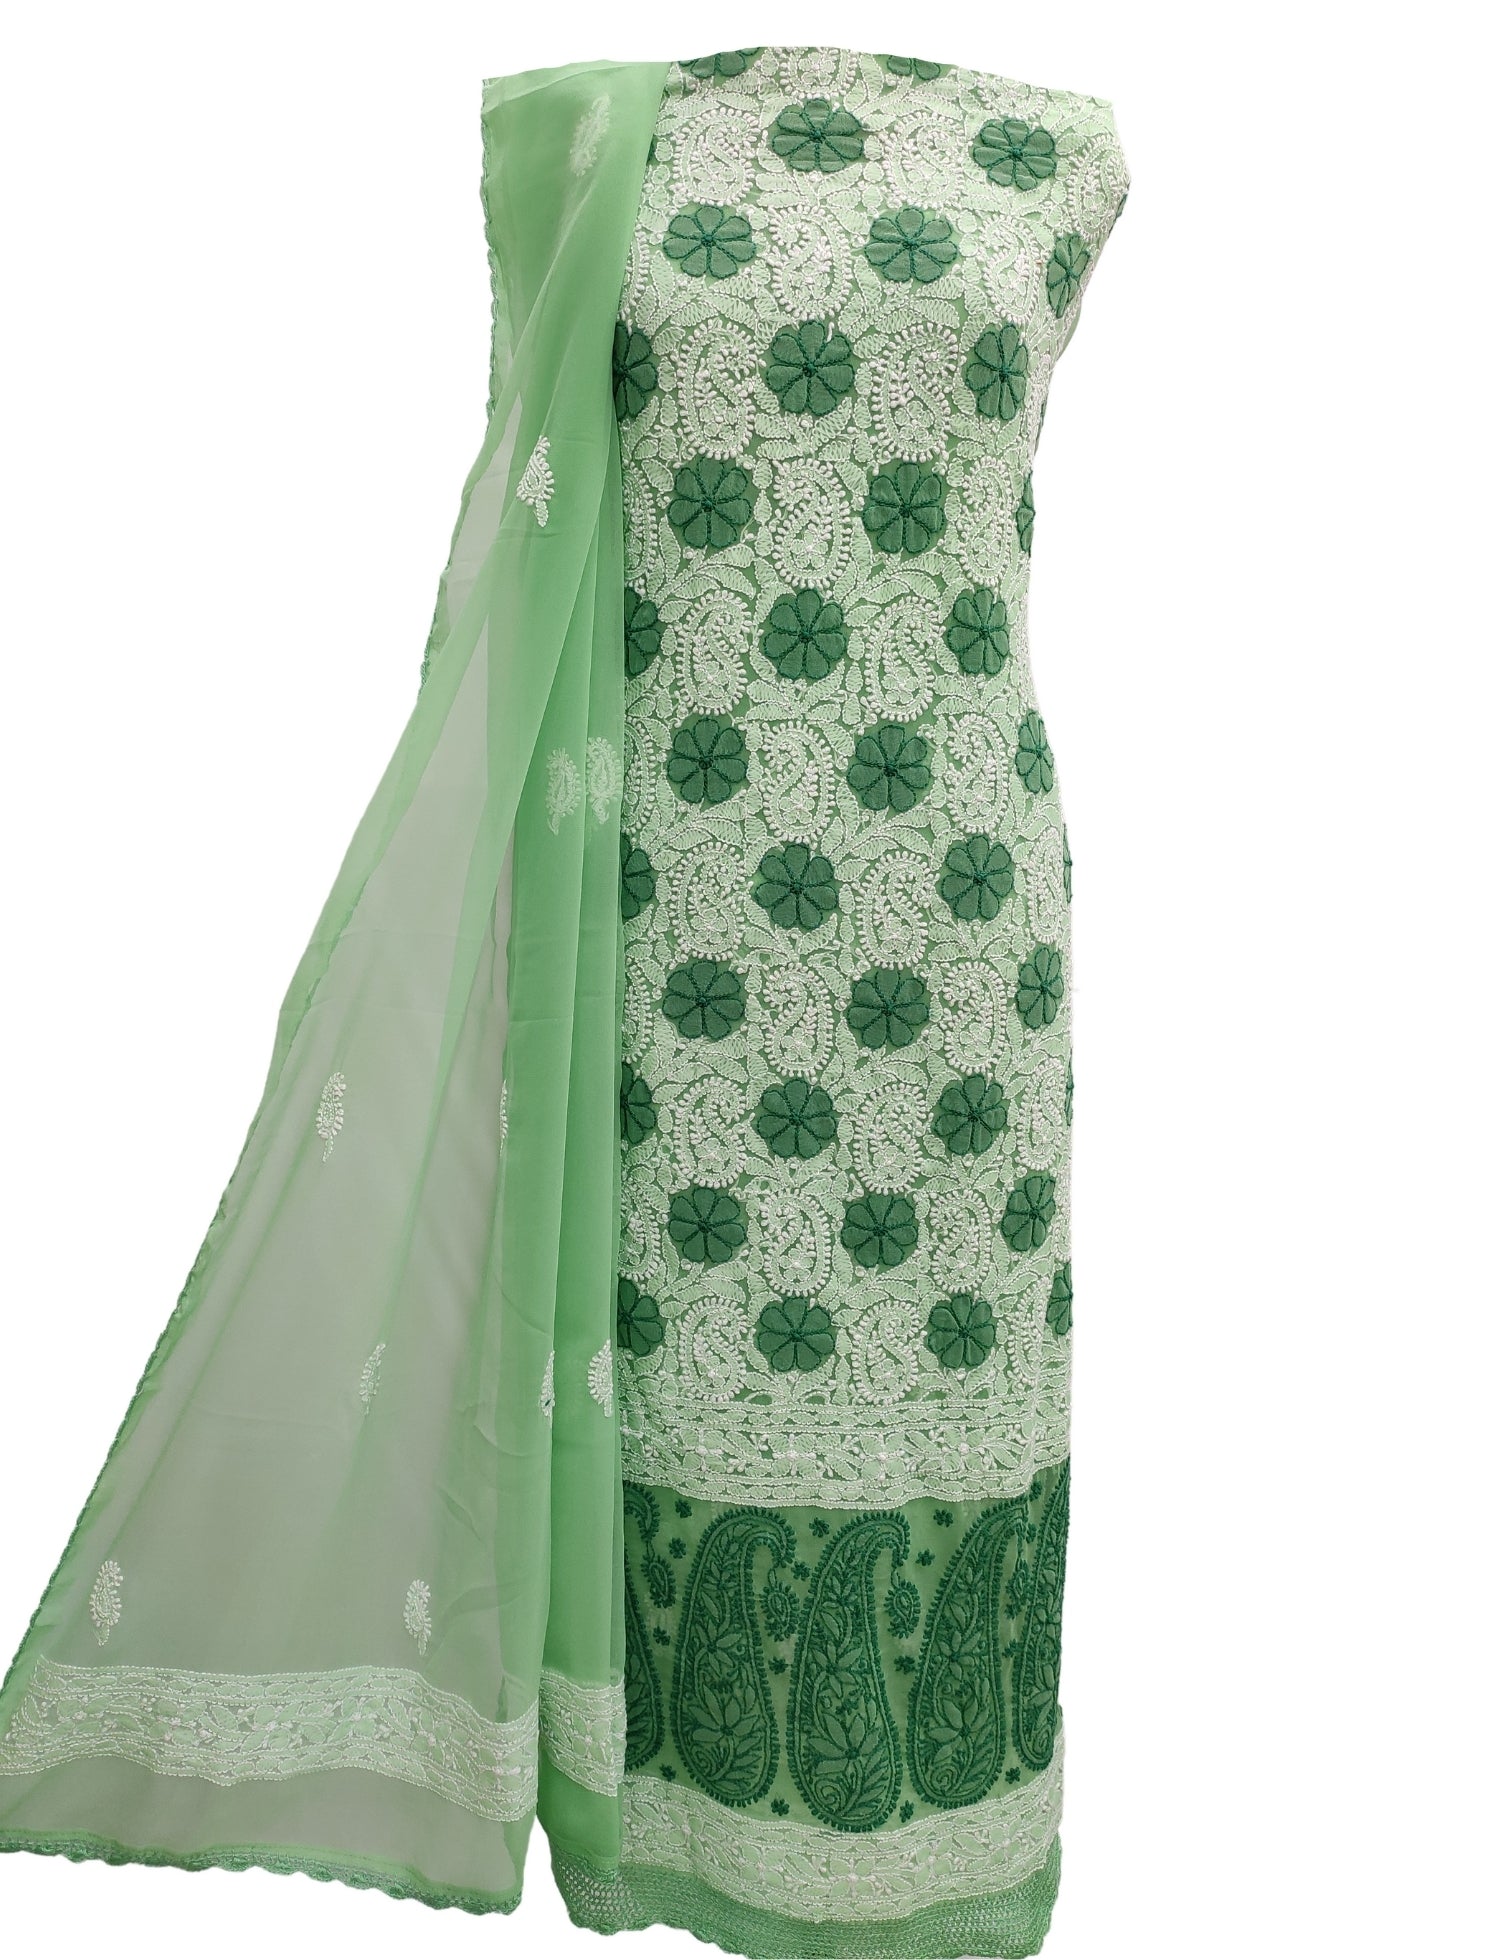 Shyamal Chikan Hand Embroidered Pista Green Georgette Lucknowi Chikankari Unstitched Suit Piece With Crosia Work - S10744 - Shyamal Chikan